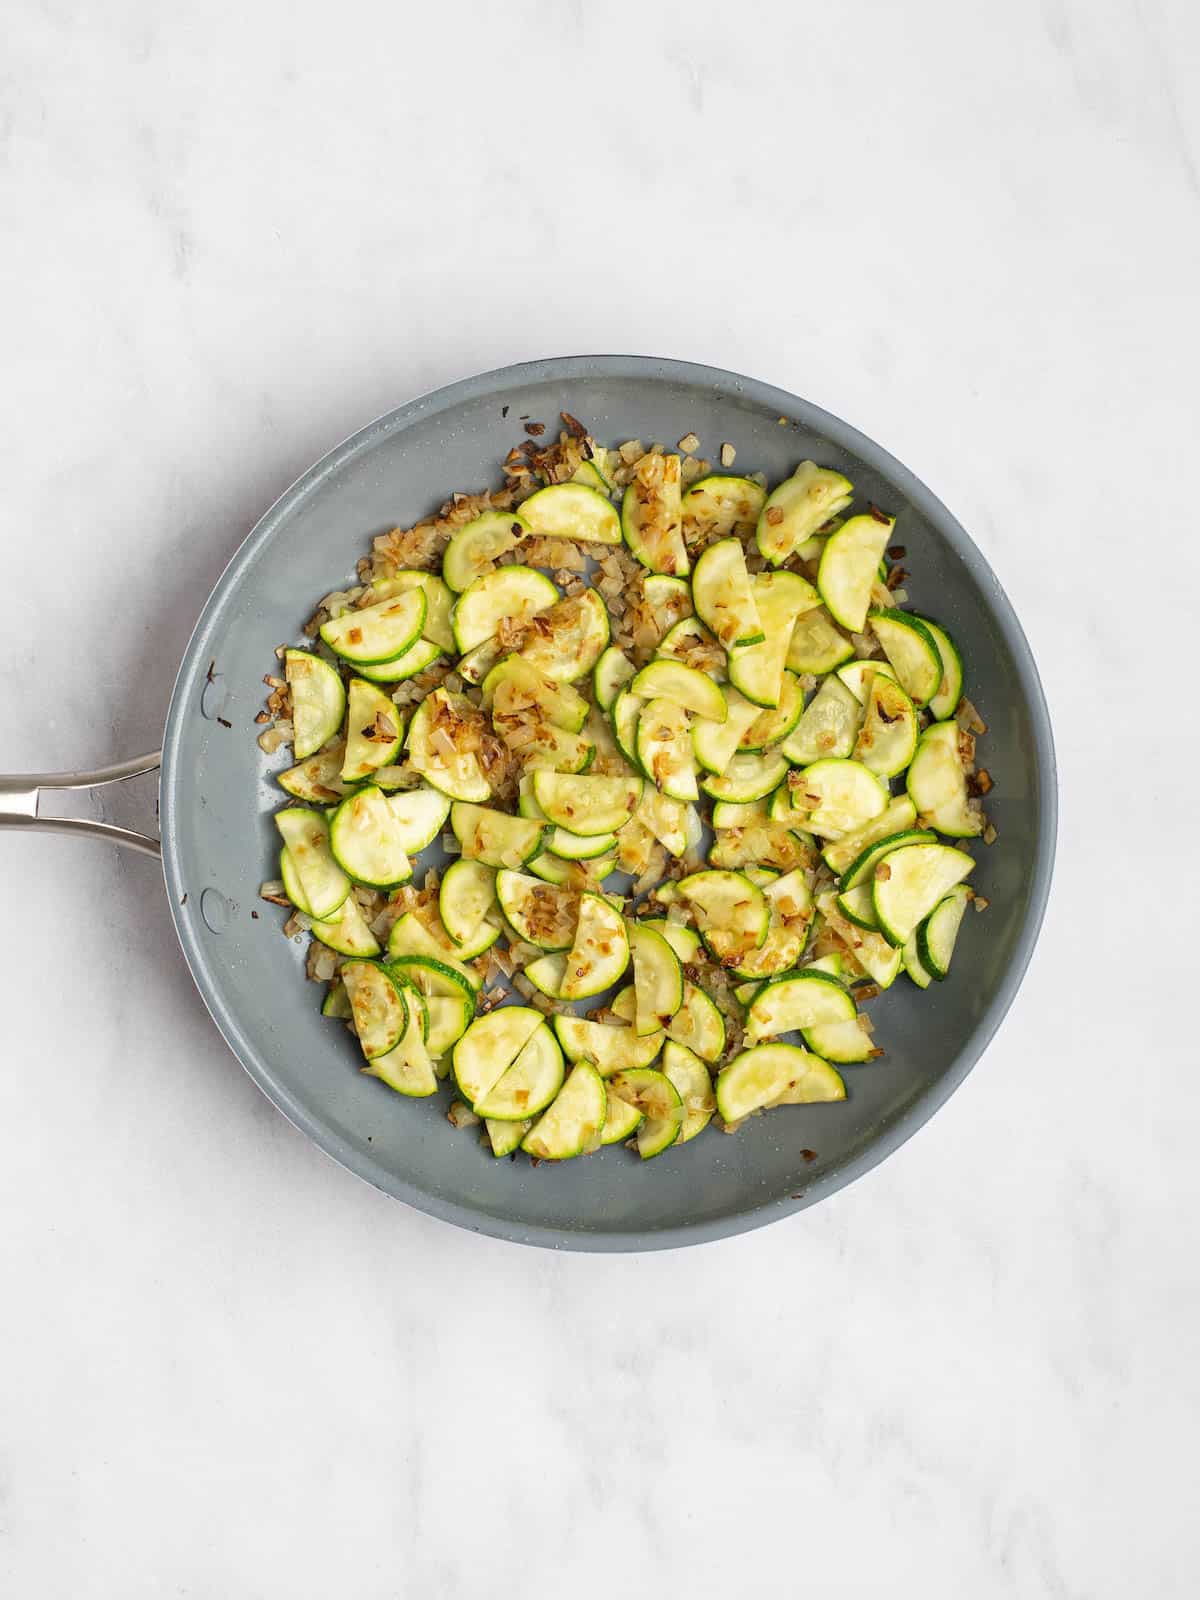 A skillet with sautéed onions and sliced zucchini.